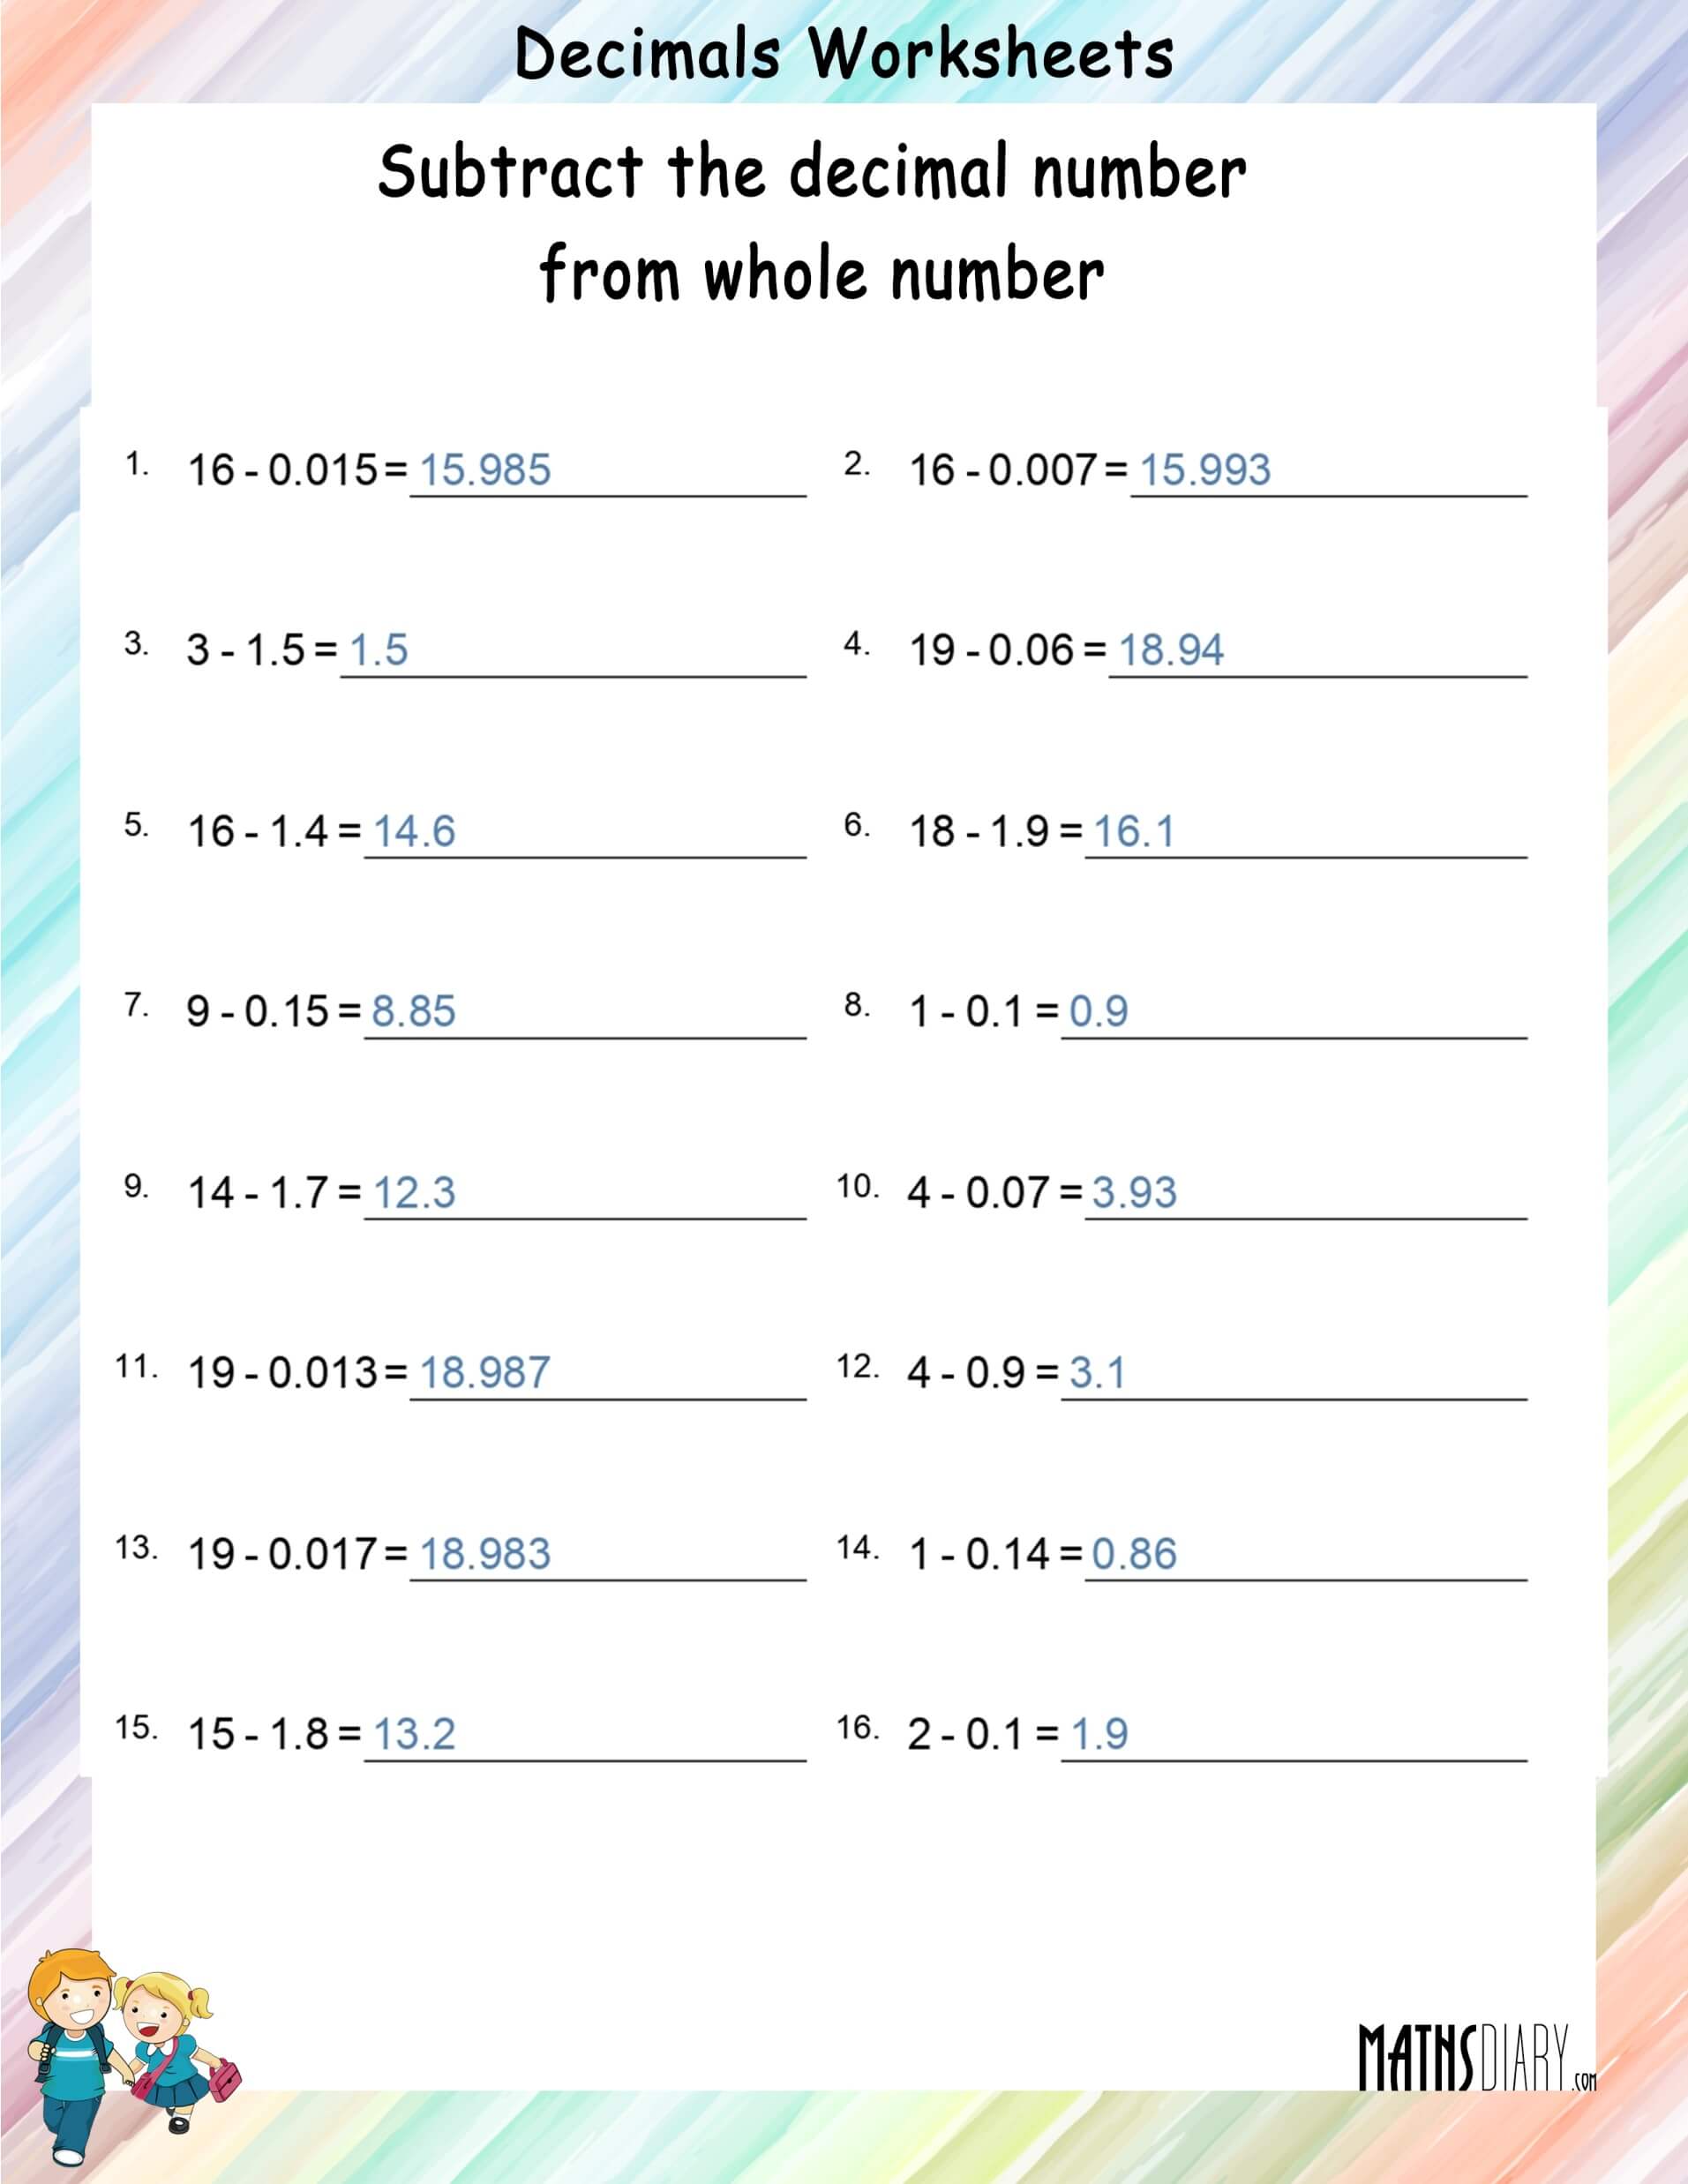 subtract-the-decimal-number-from-the-whole-number-math-worksheets-mathsdiary